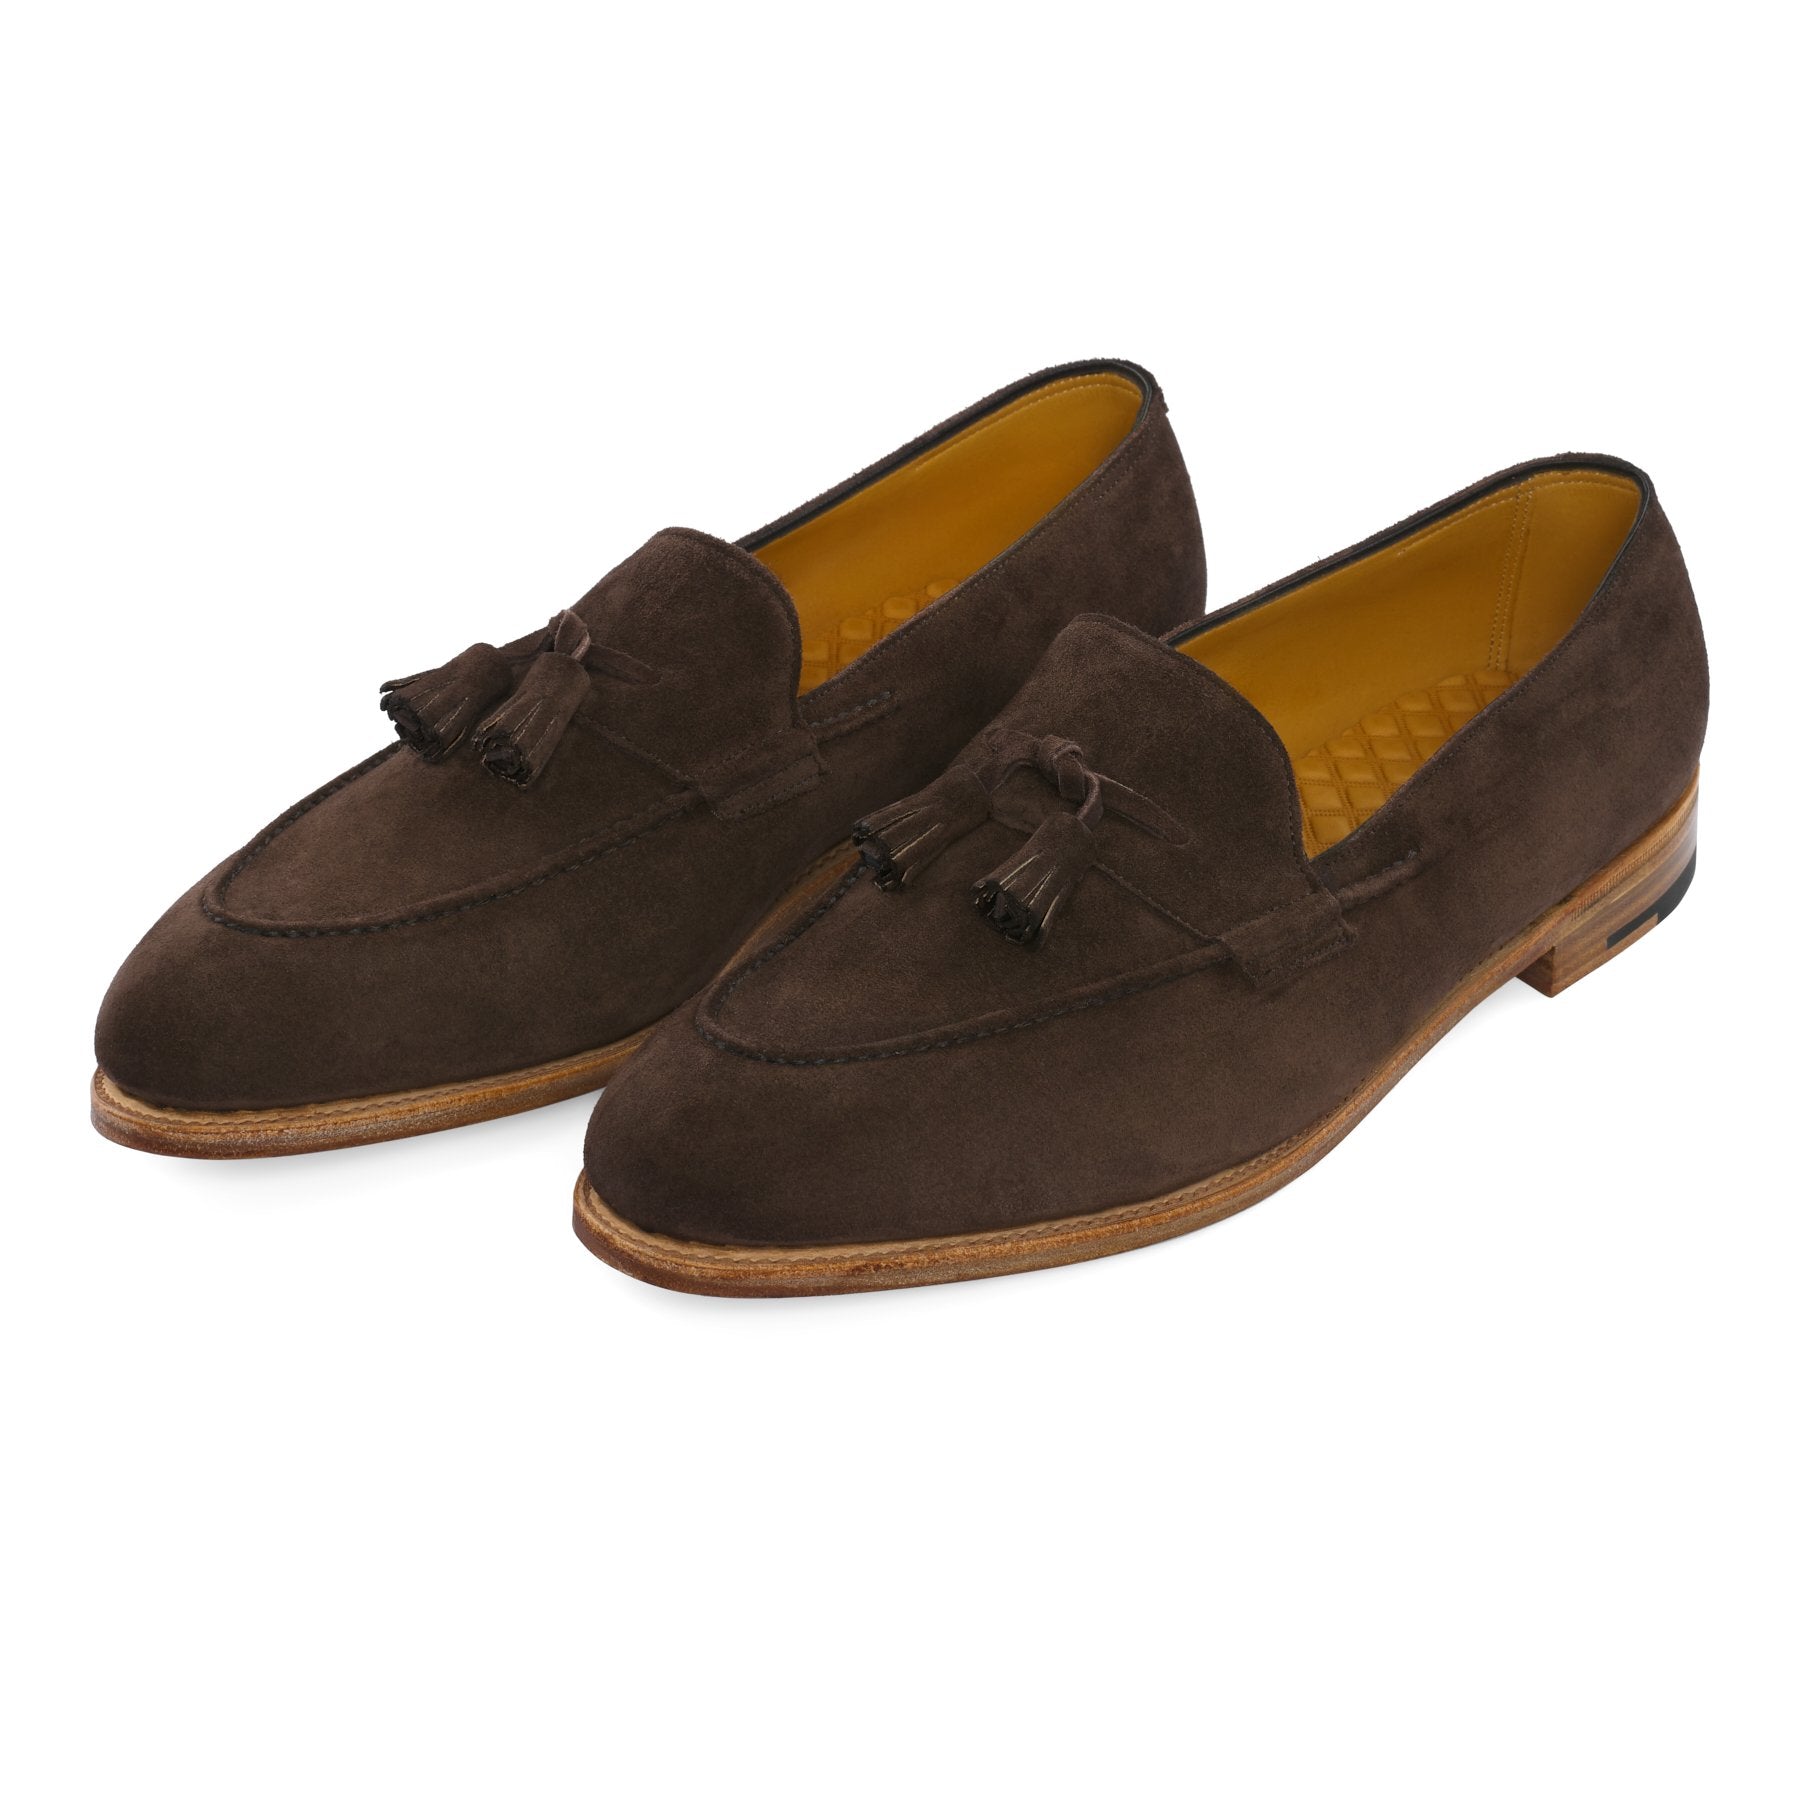 "Callington" Suede Loafer with Hand-Stitching Apron in Brown